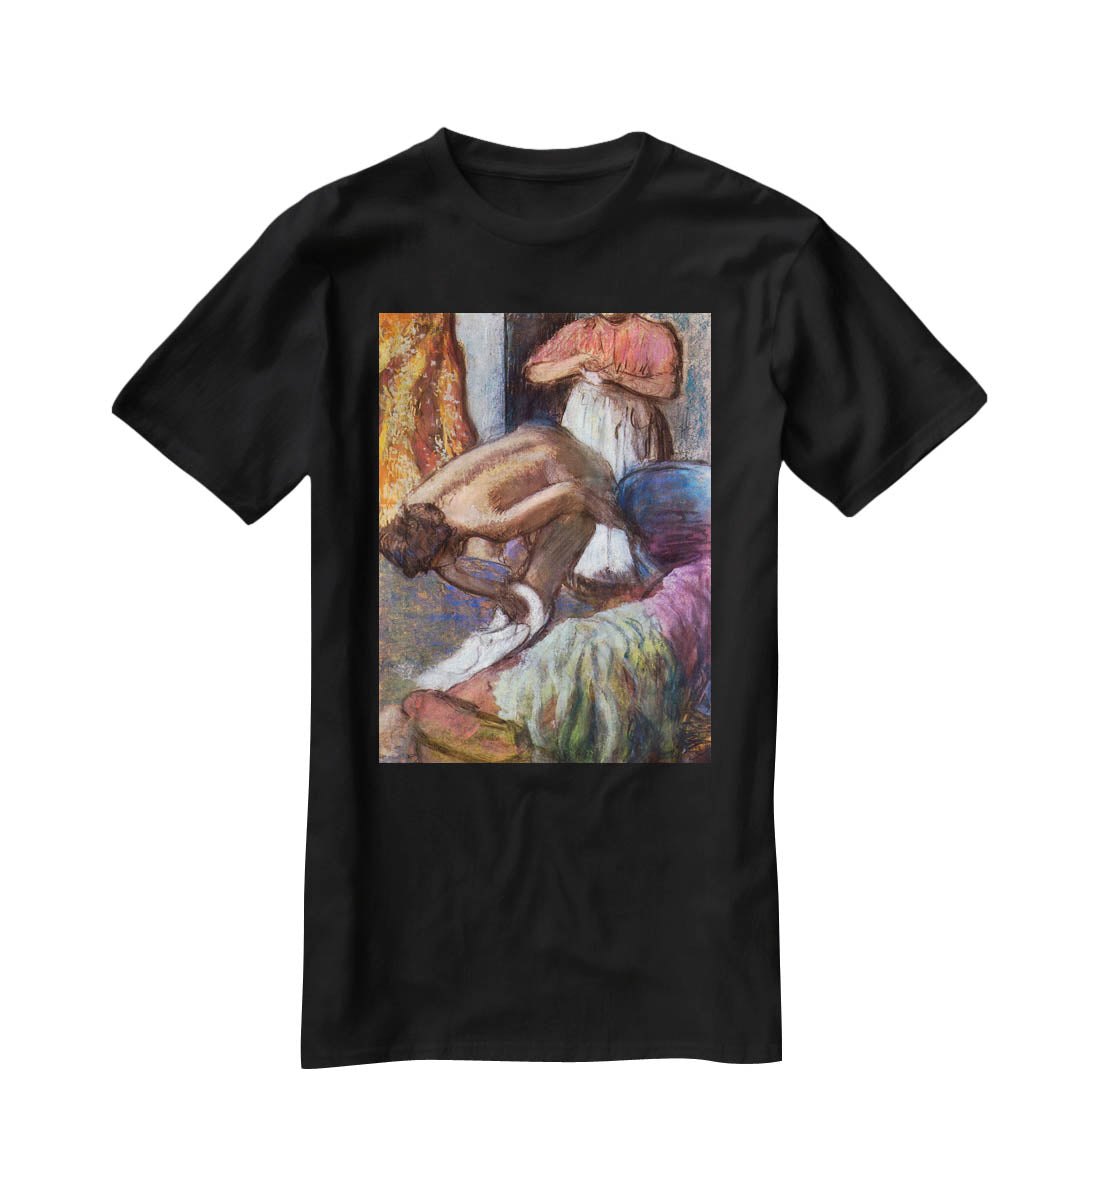 The strengthening after the bathwater by Degas T-Shirt - Canvas Art Rocks - 1